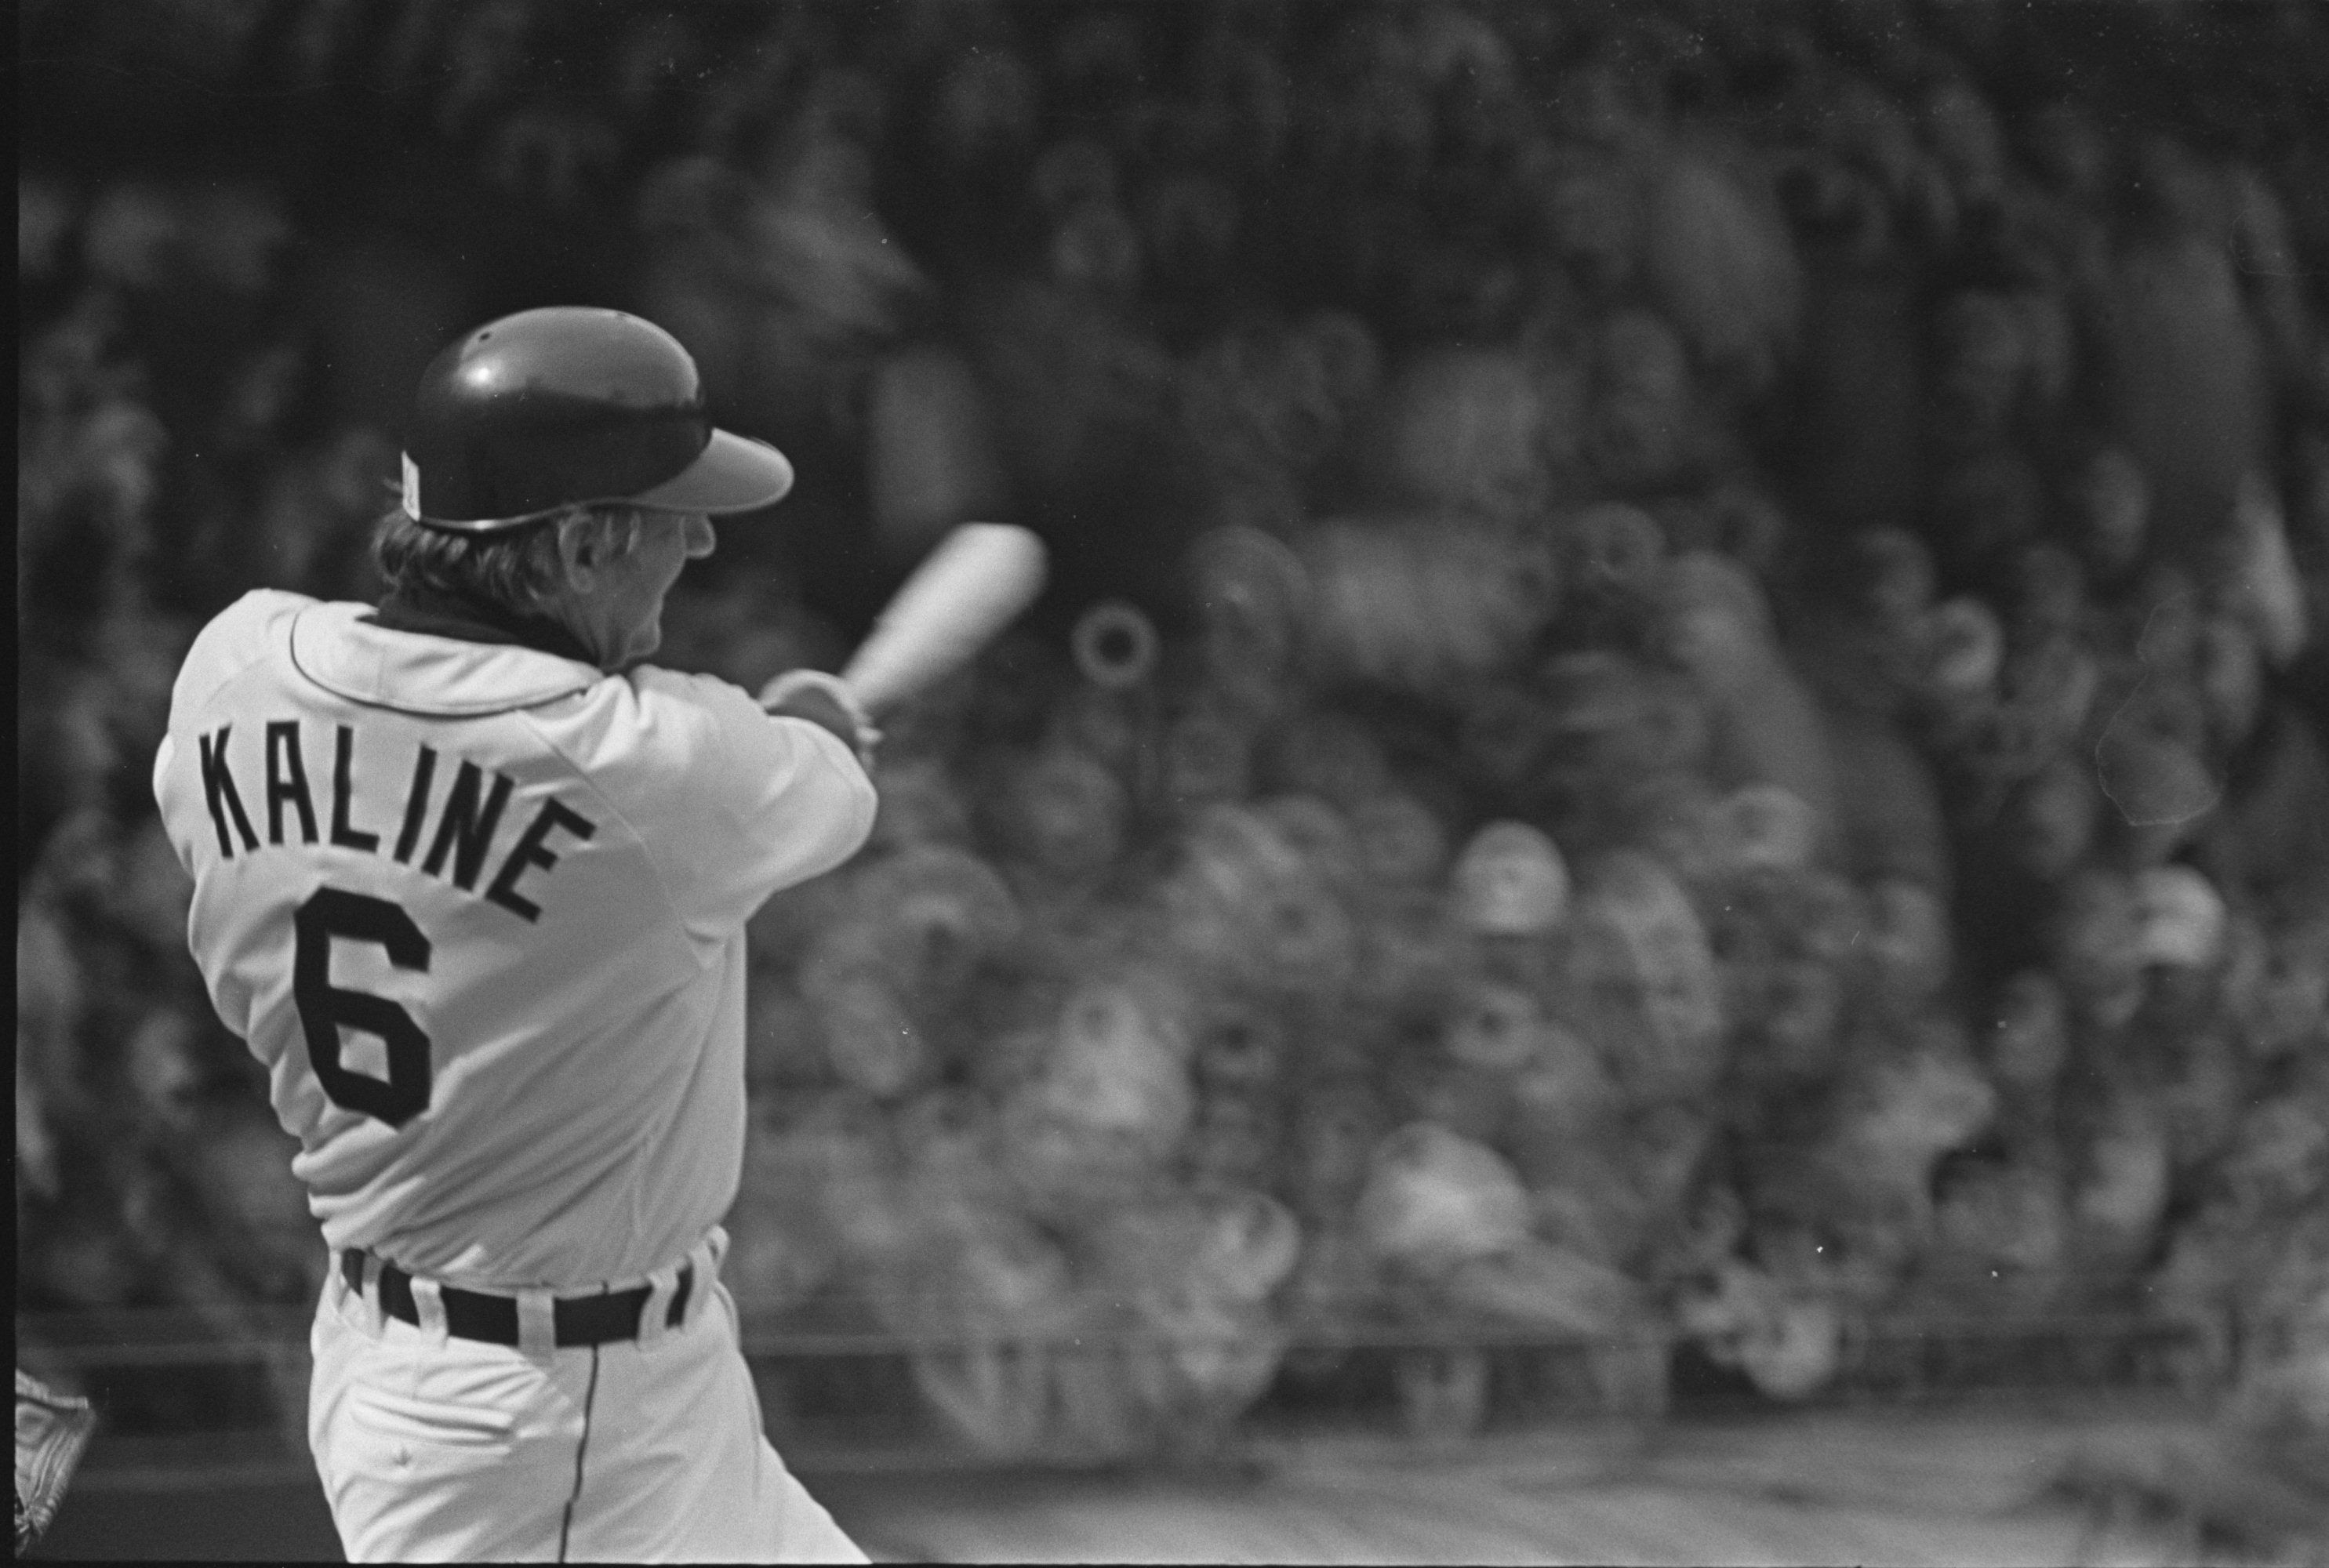 Al Kaline Collection tells story of one of baseball's most humble